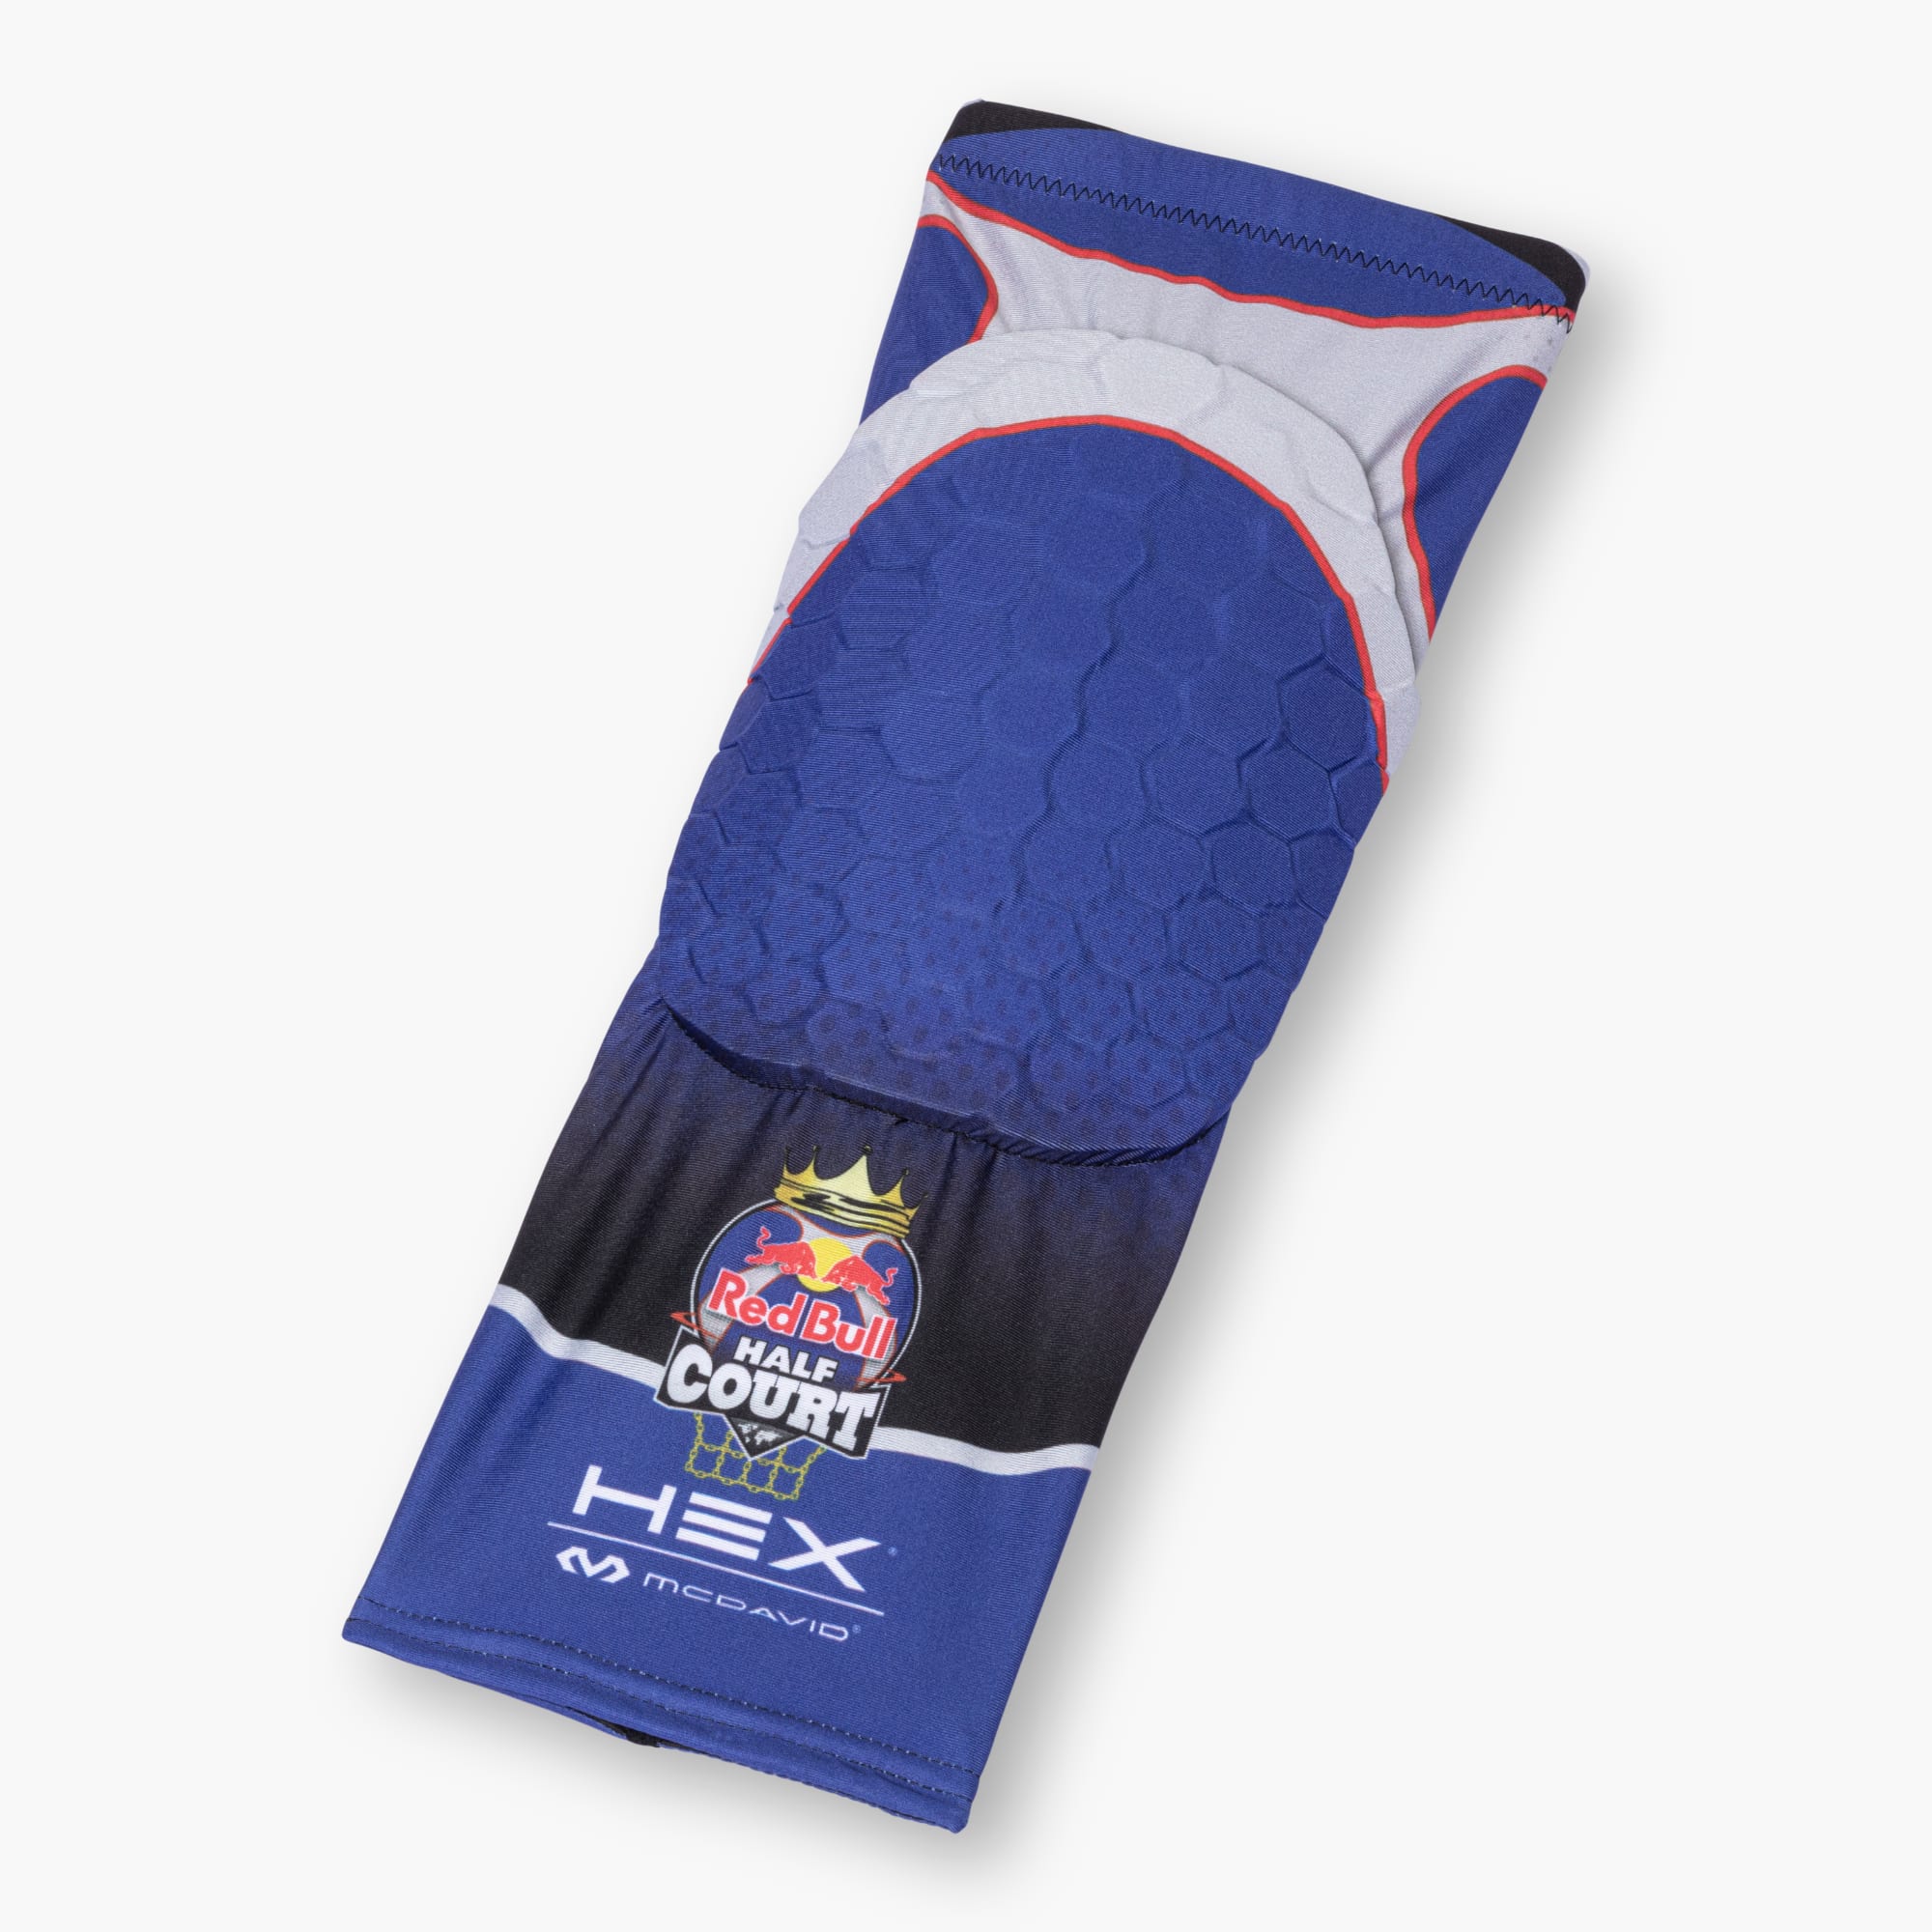 Red Bull Half Court Shop: Red Bull Half Court Leg Sleeve | only here at ...